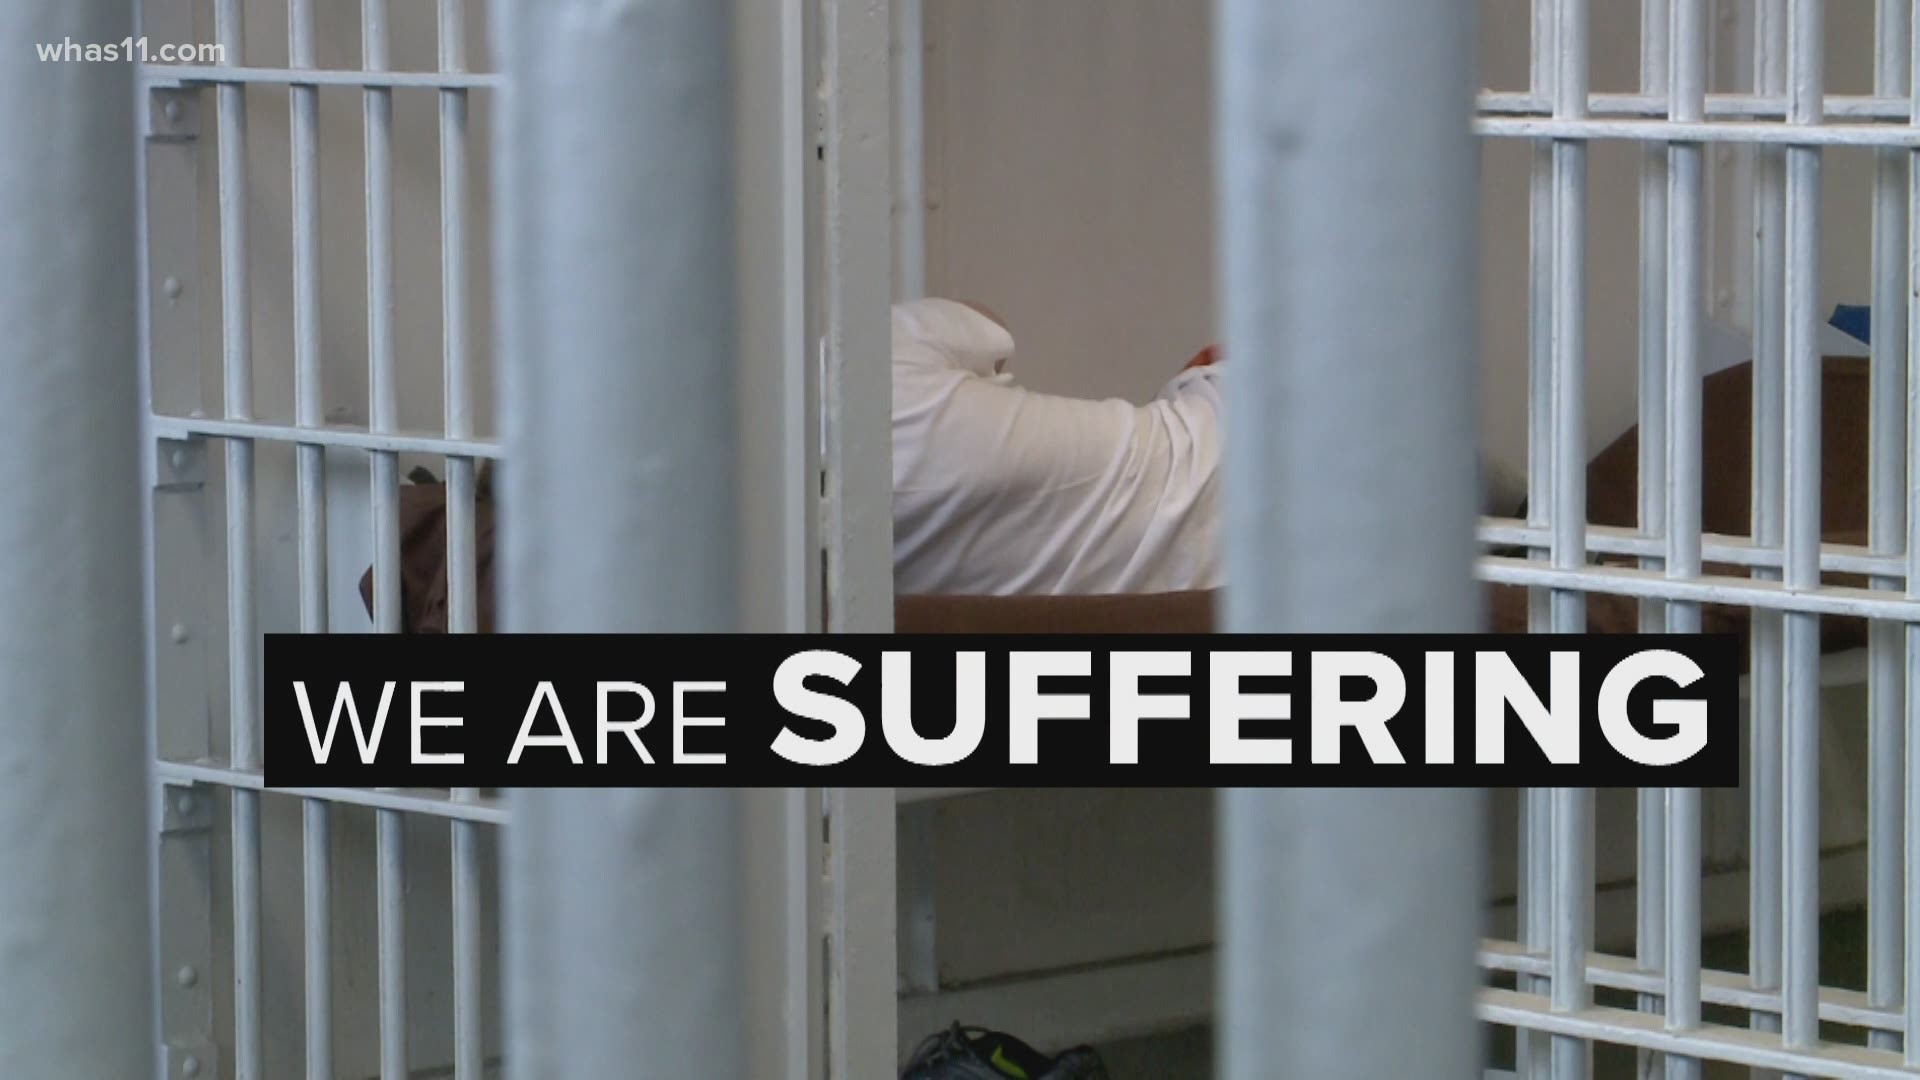 In the months since the coronavirus pandemic gripped Kentucky, the FOCUS team has been investigating conditions inside the state’s correctional facilities.